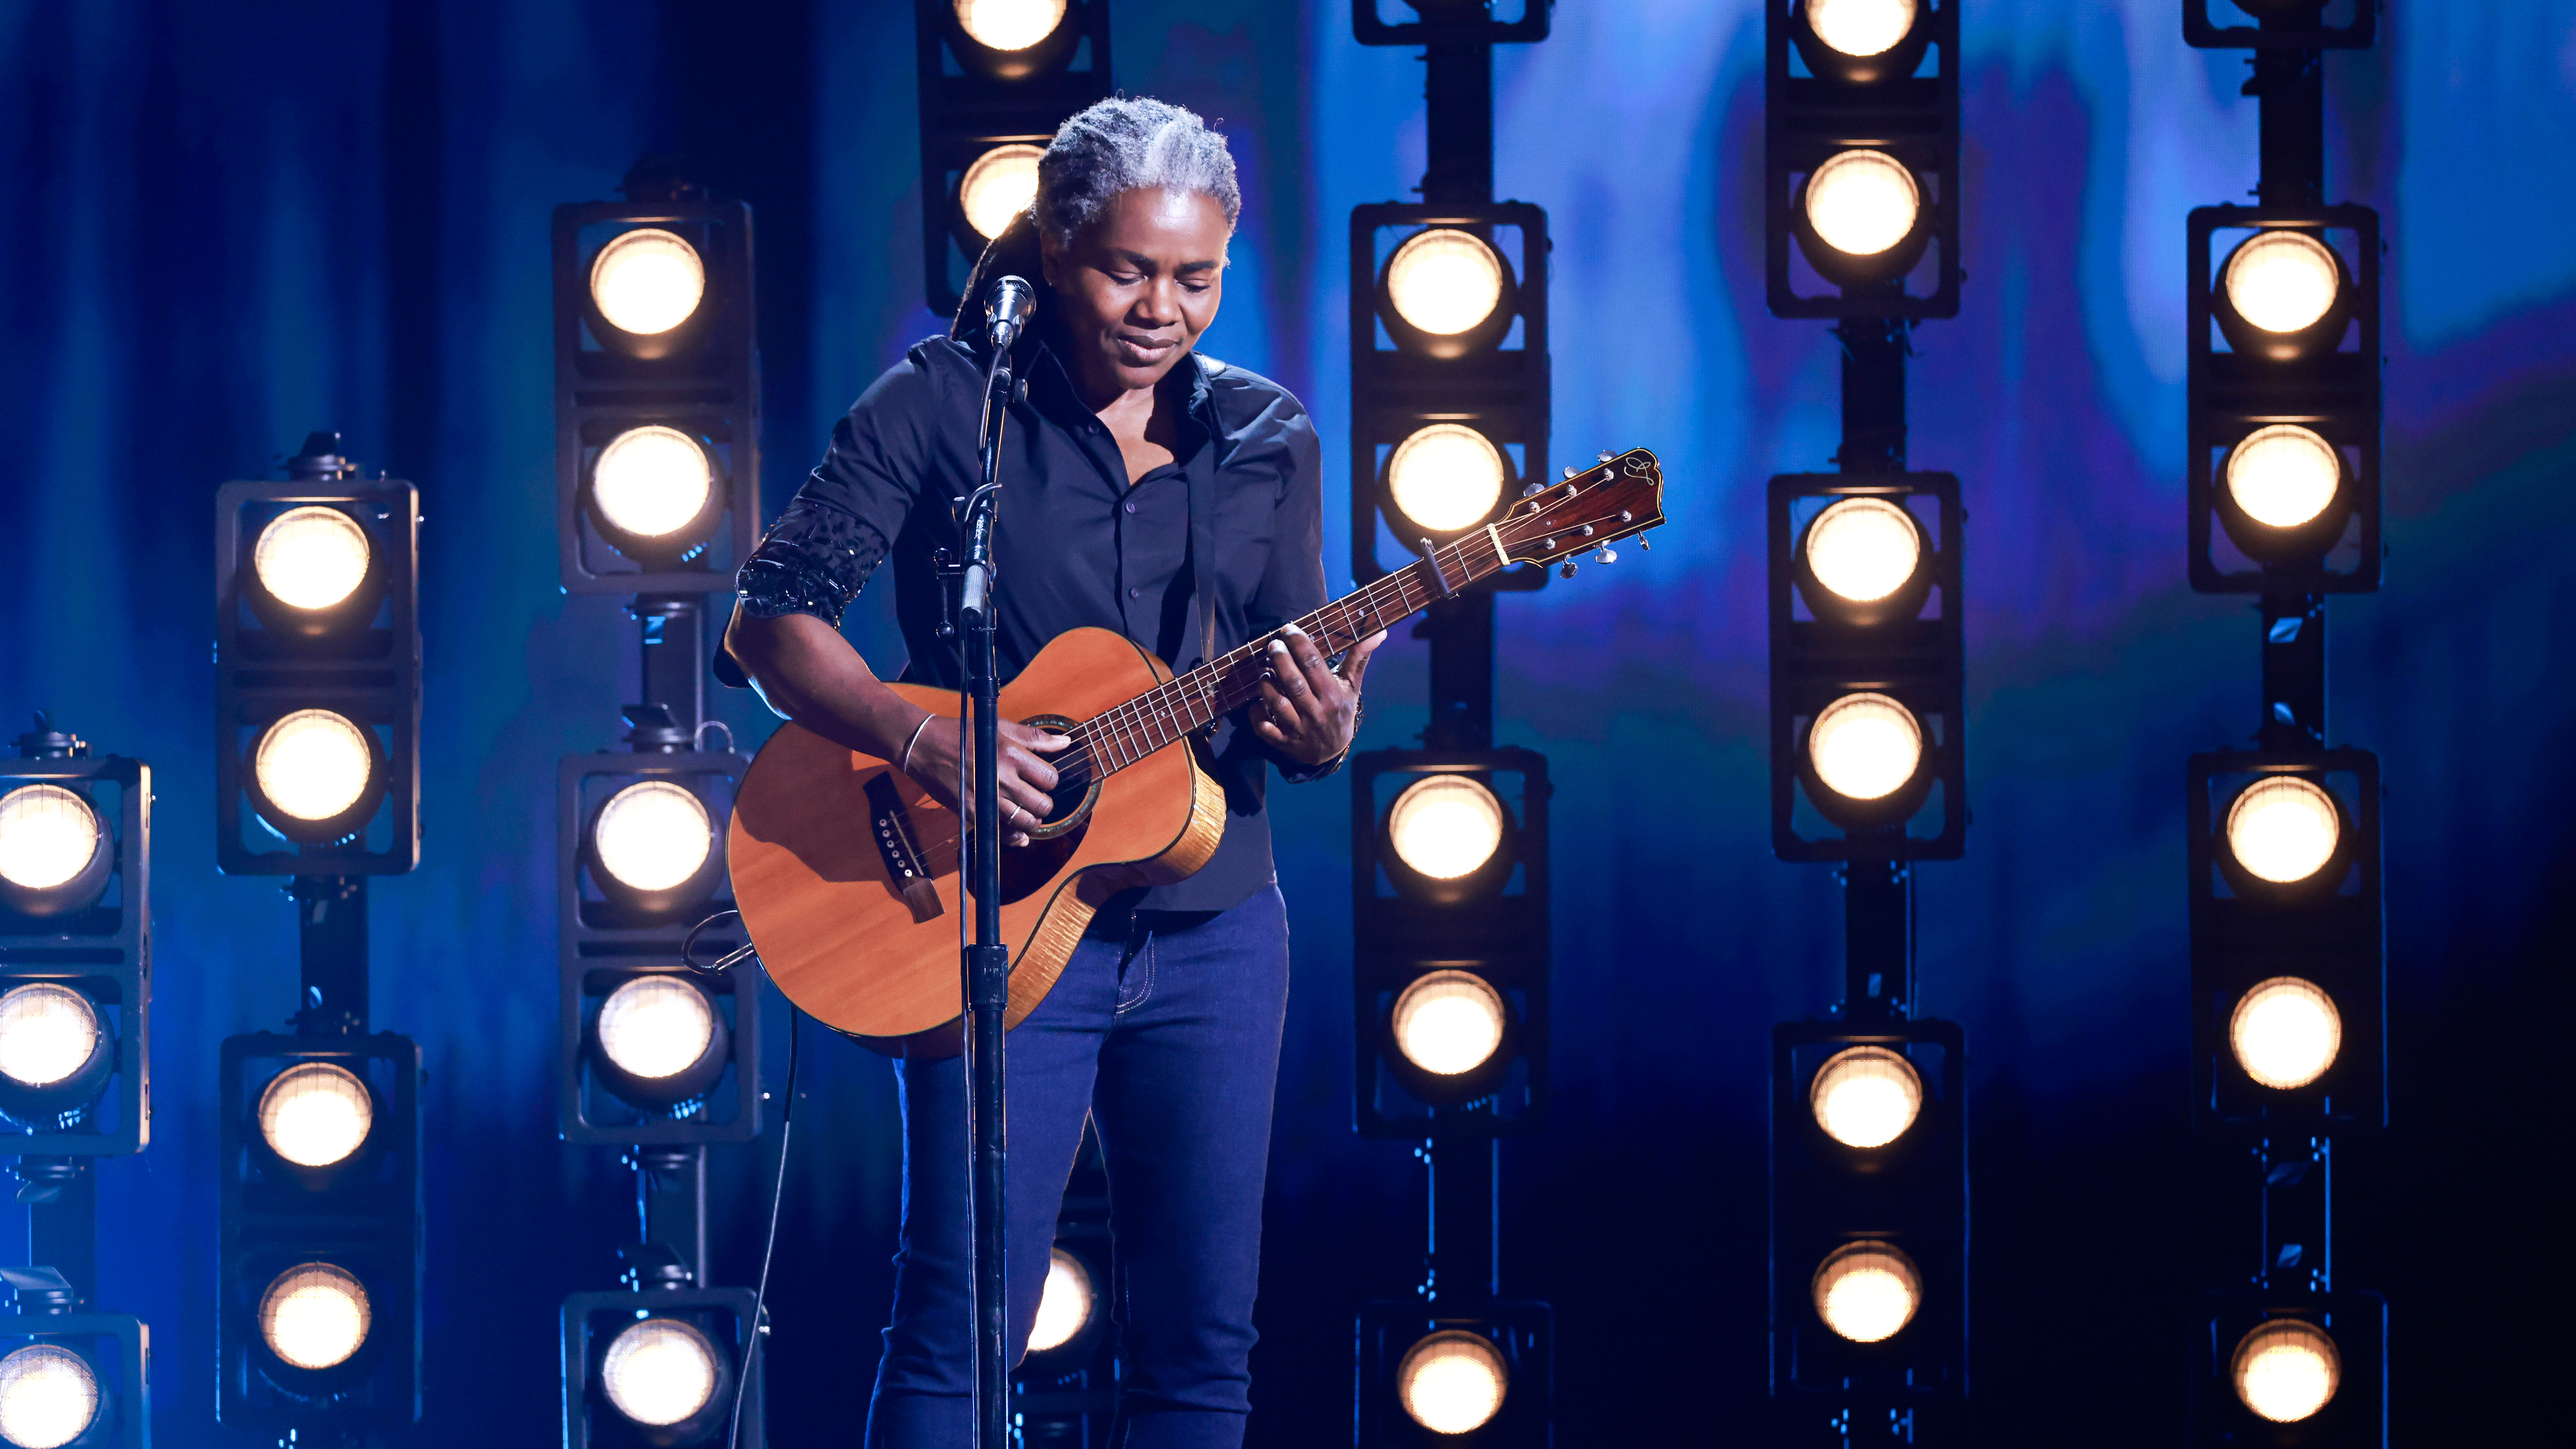 Tracy Chapman holding a guitar during her performance at the Grammys